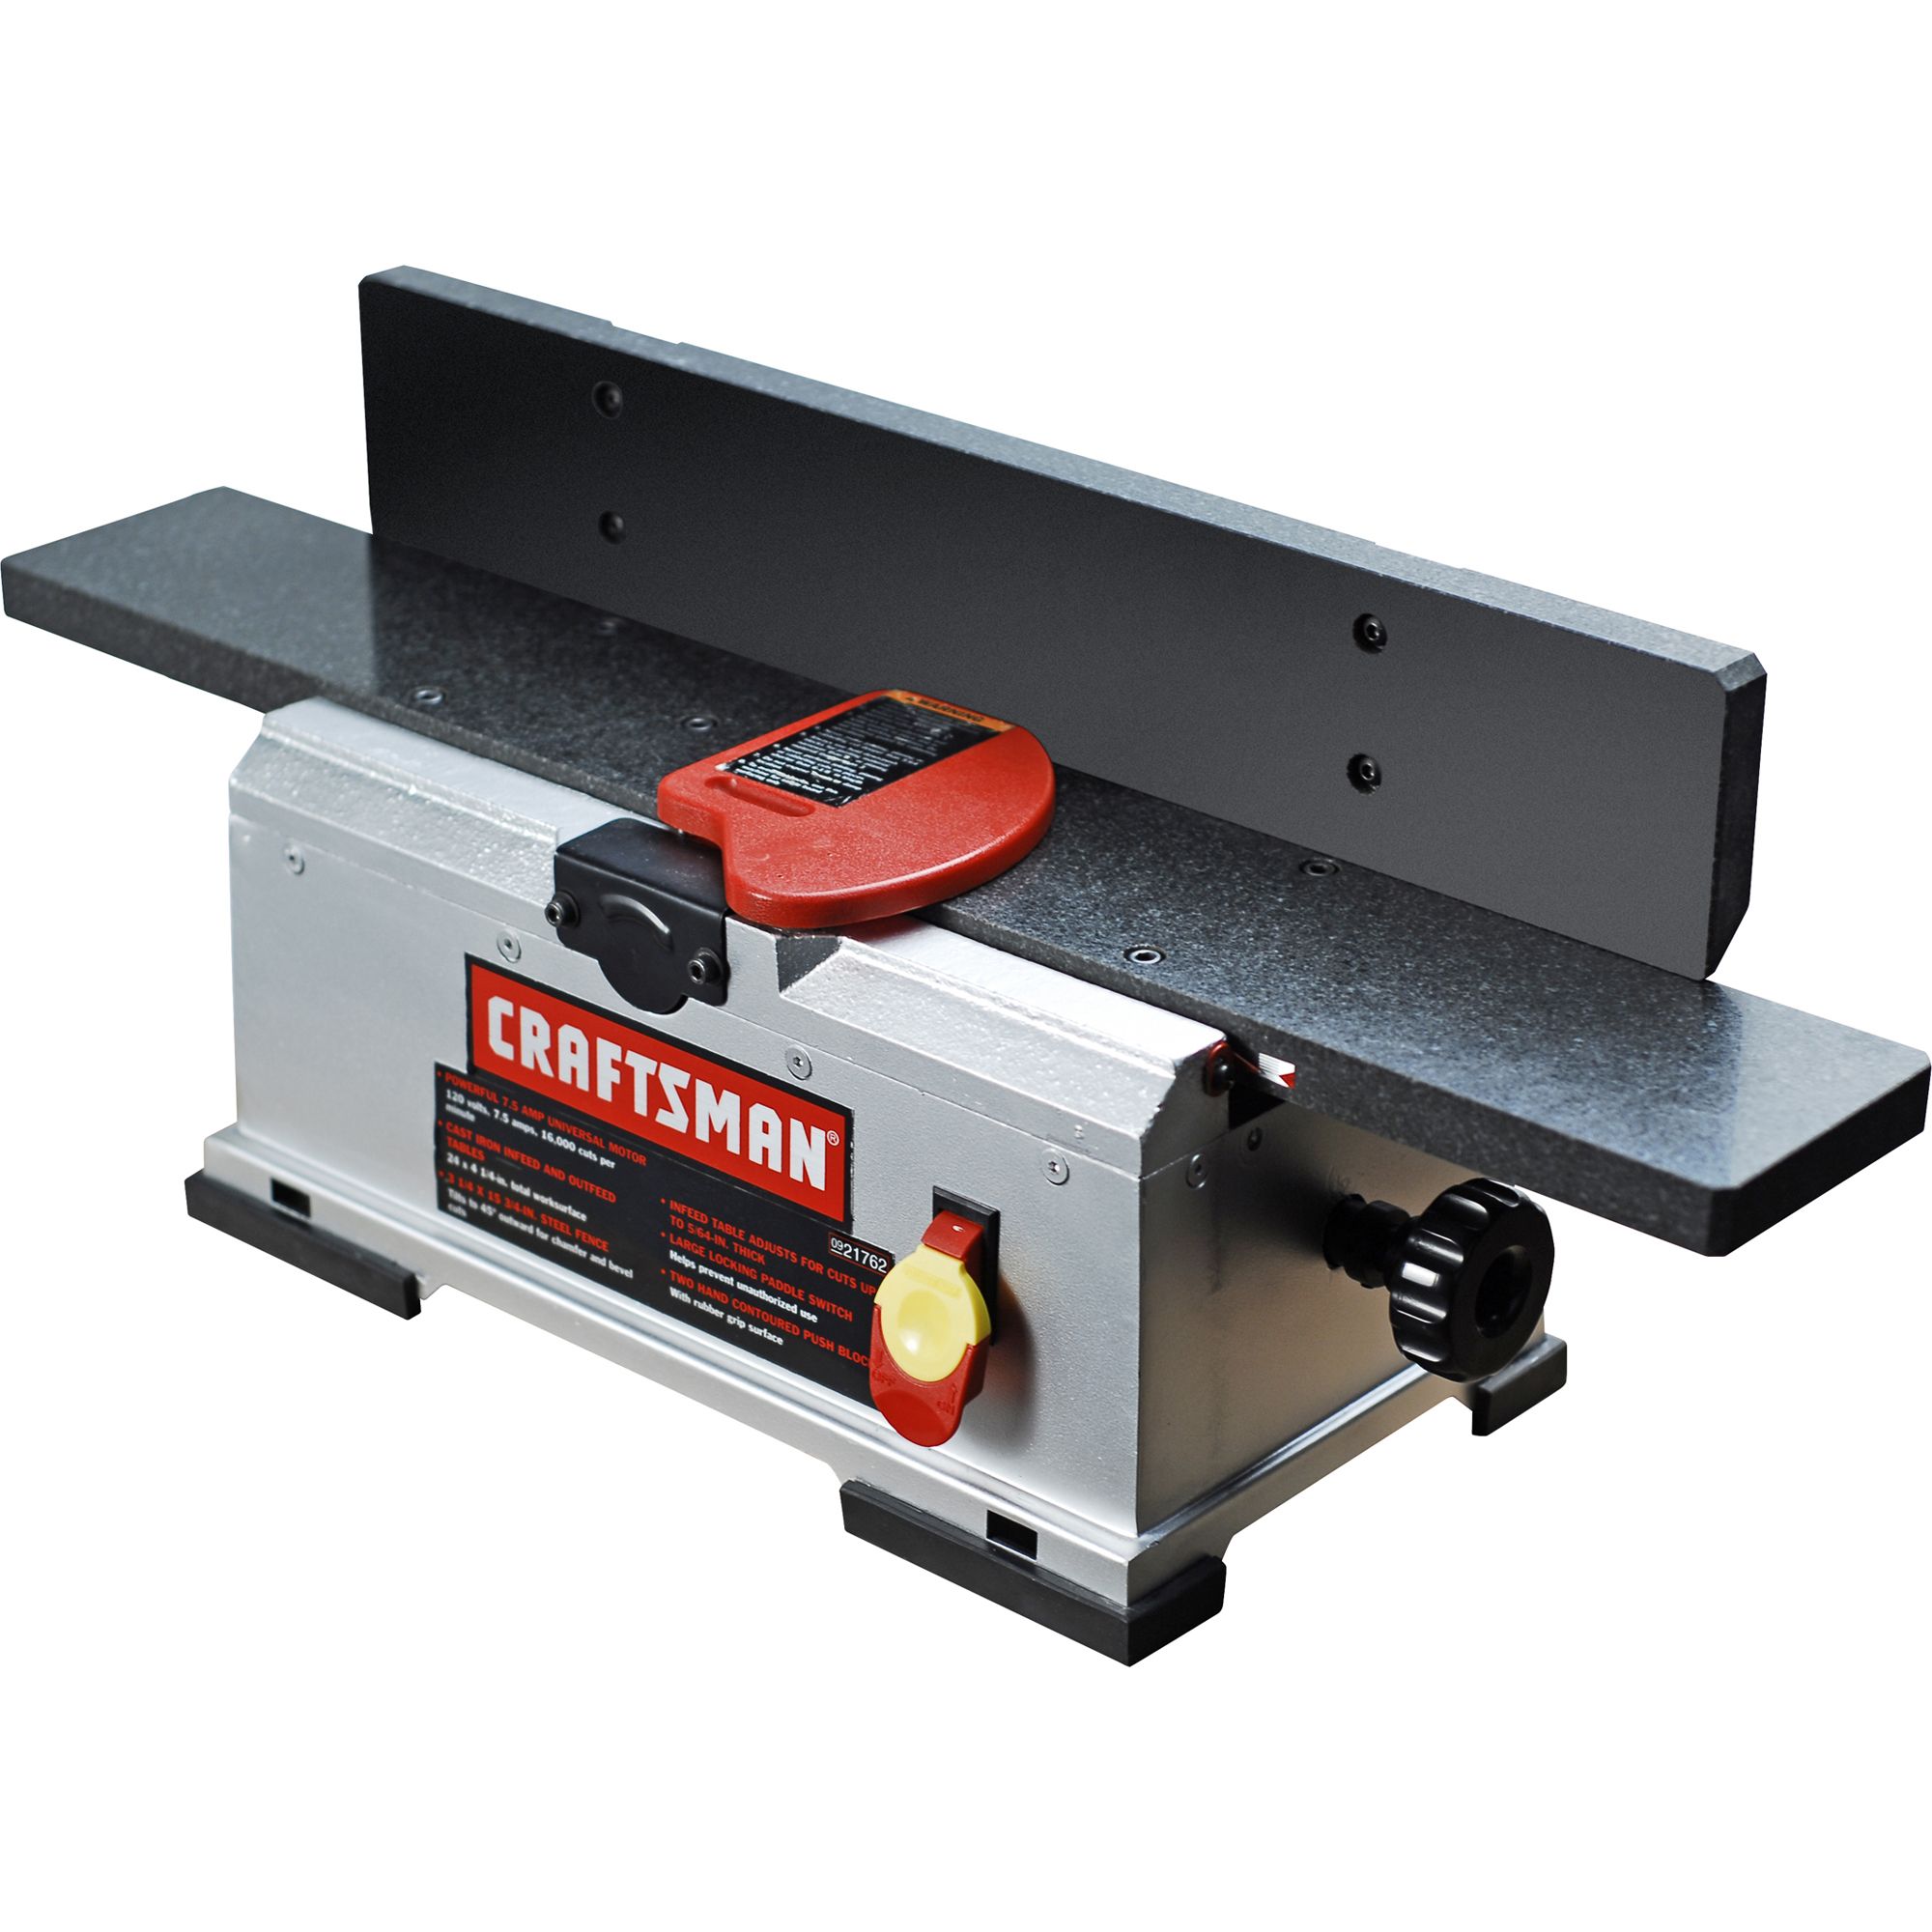 Do You Need A Planer For Woodworking